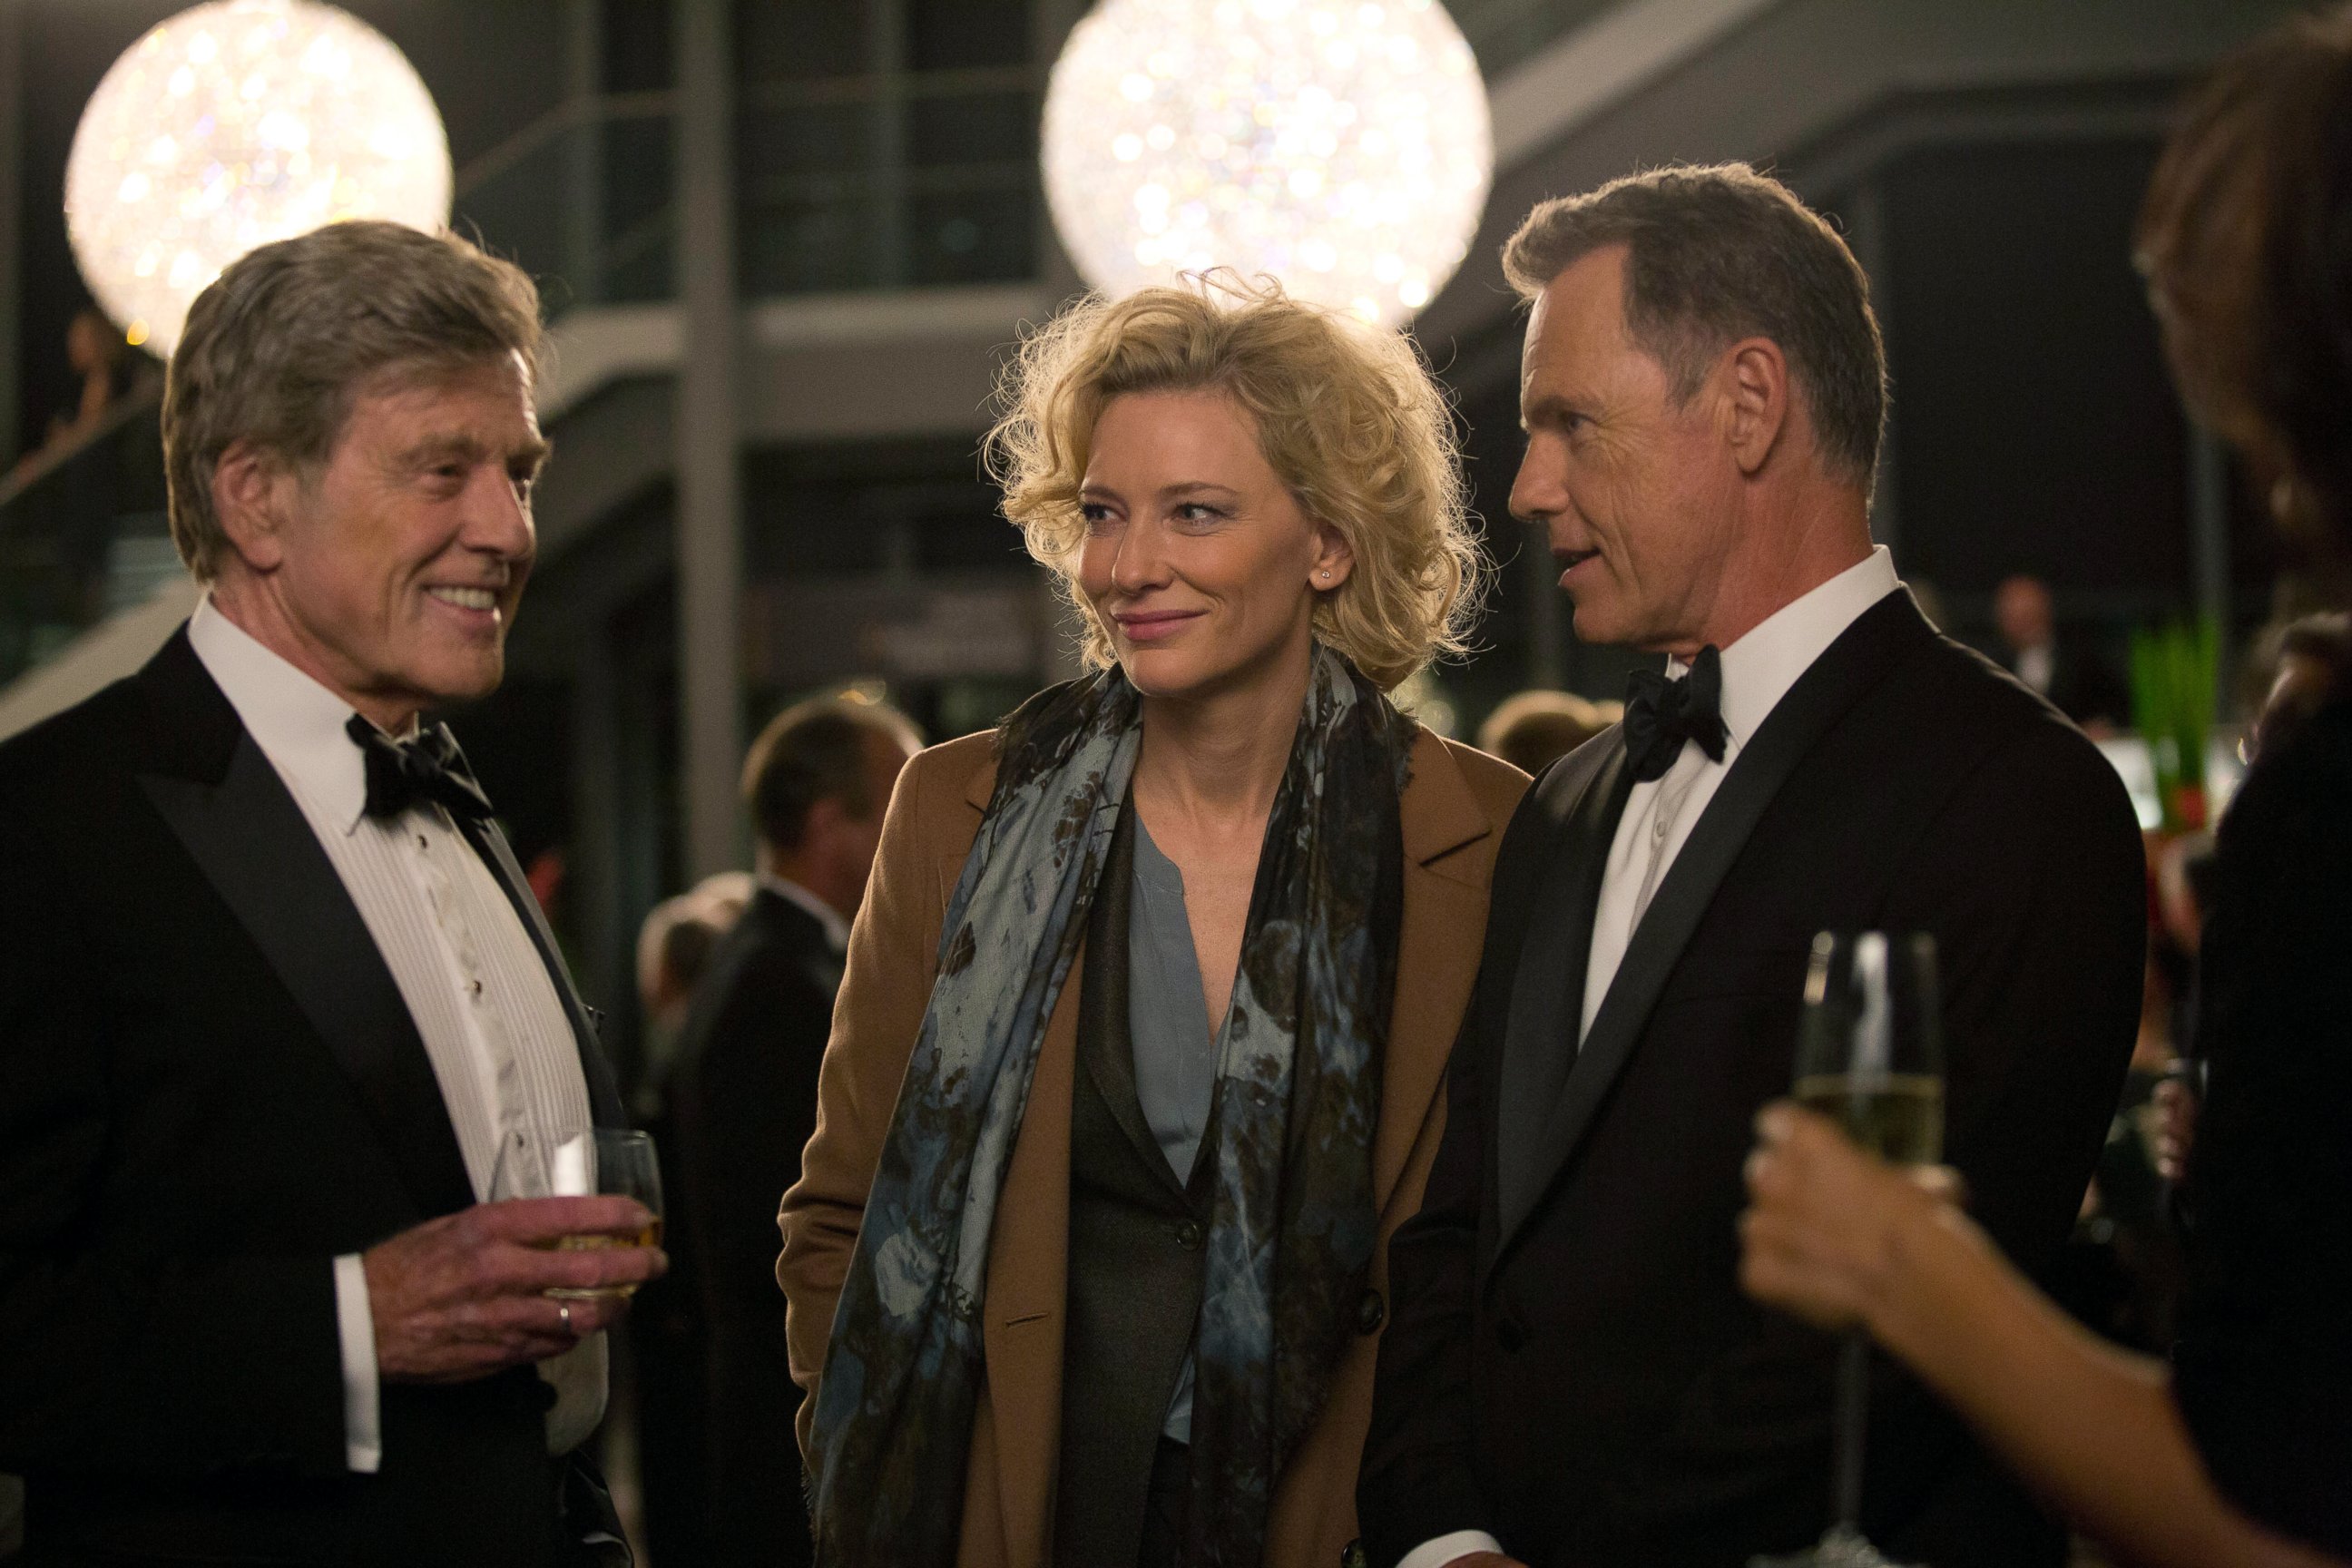 PHOTO: Robert Redford as Dan Rather, Cate Blanchett as Mary Mapes and Bruce Greenwood as Andrew Heyward in a scene from "Truth."